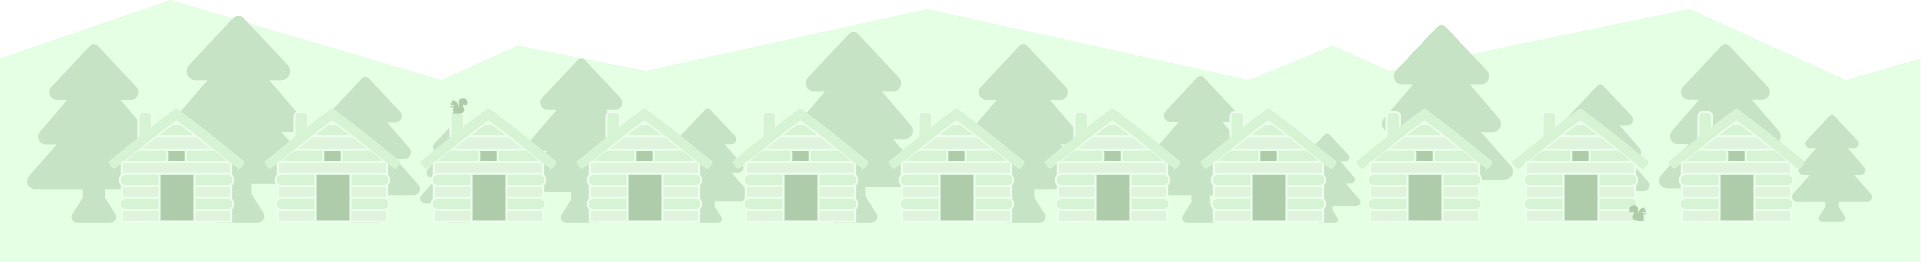 Illustration of cottages in a wooded area.